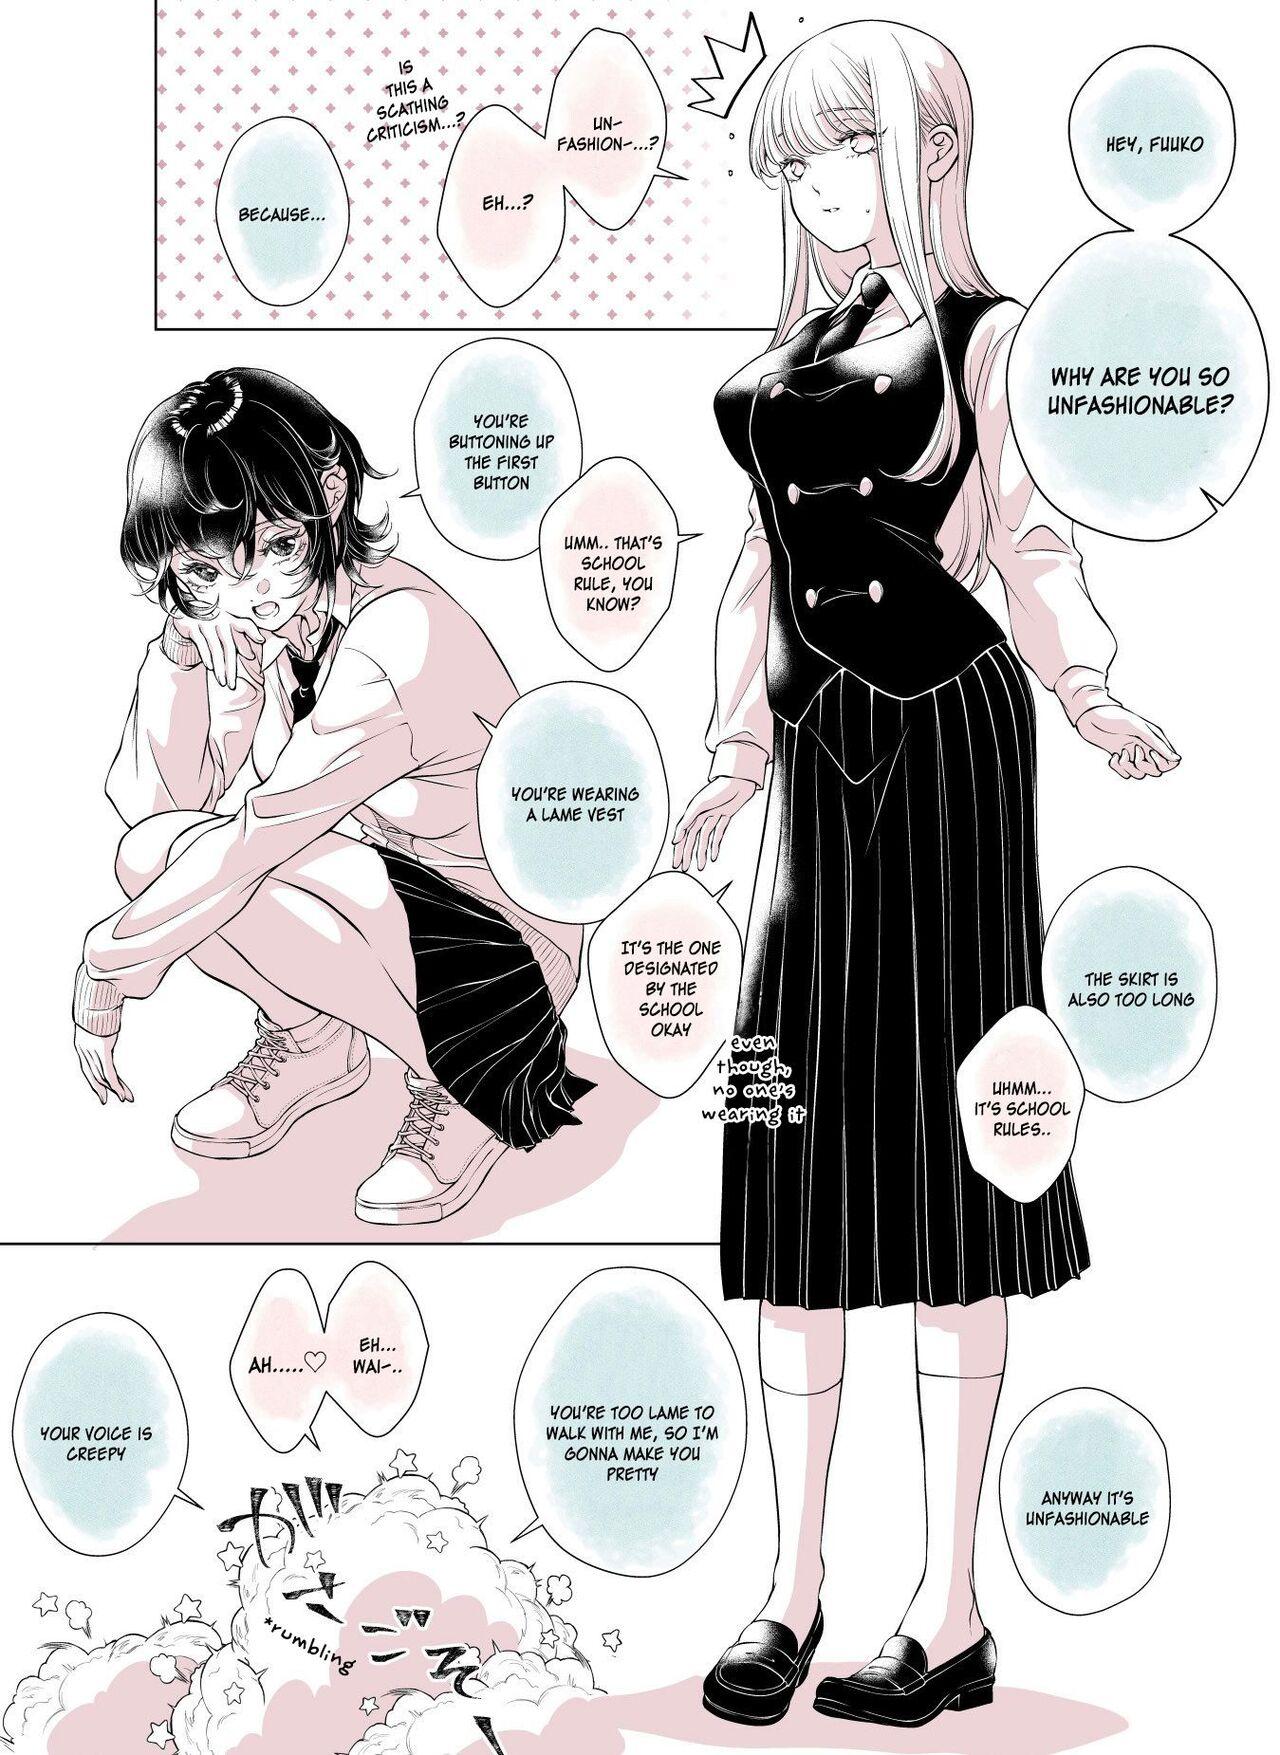 My Girlfriend's Not Here Today Ch. 7-11 + Twitter extras 163